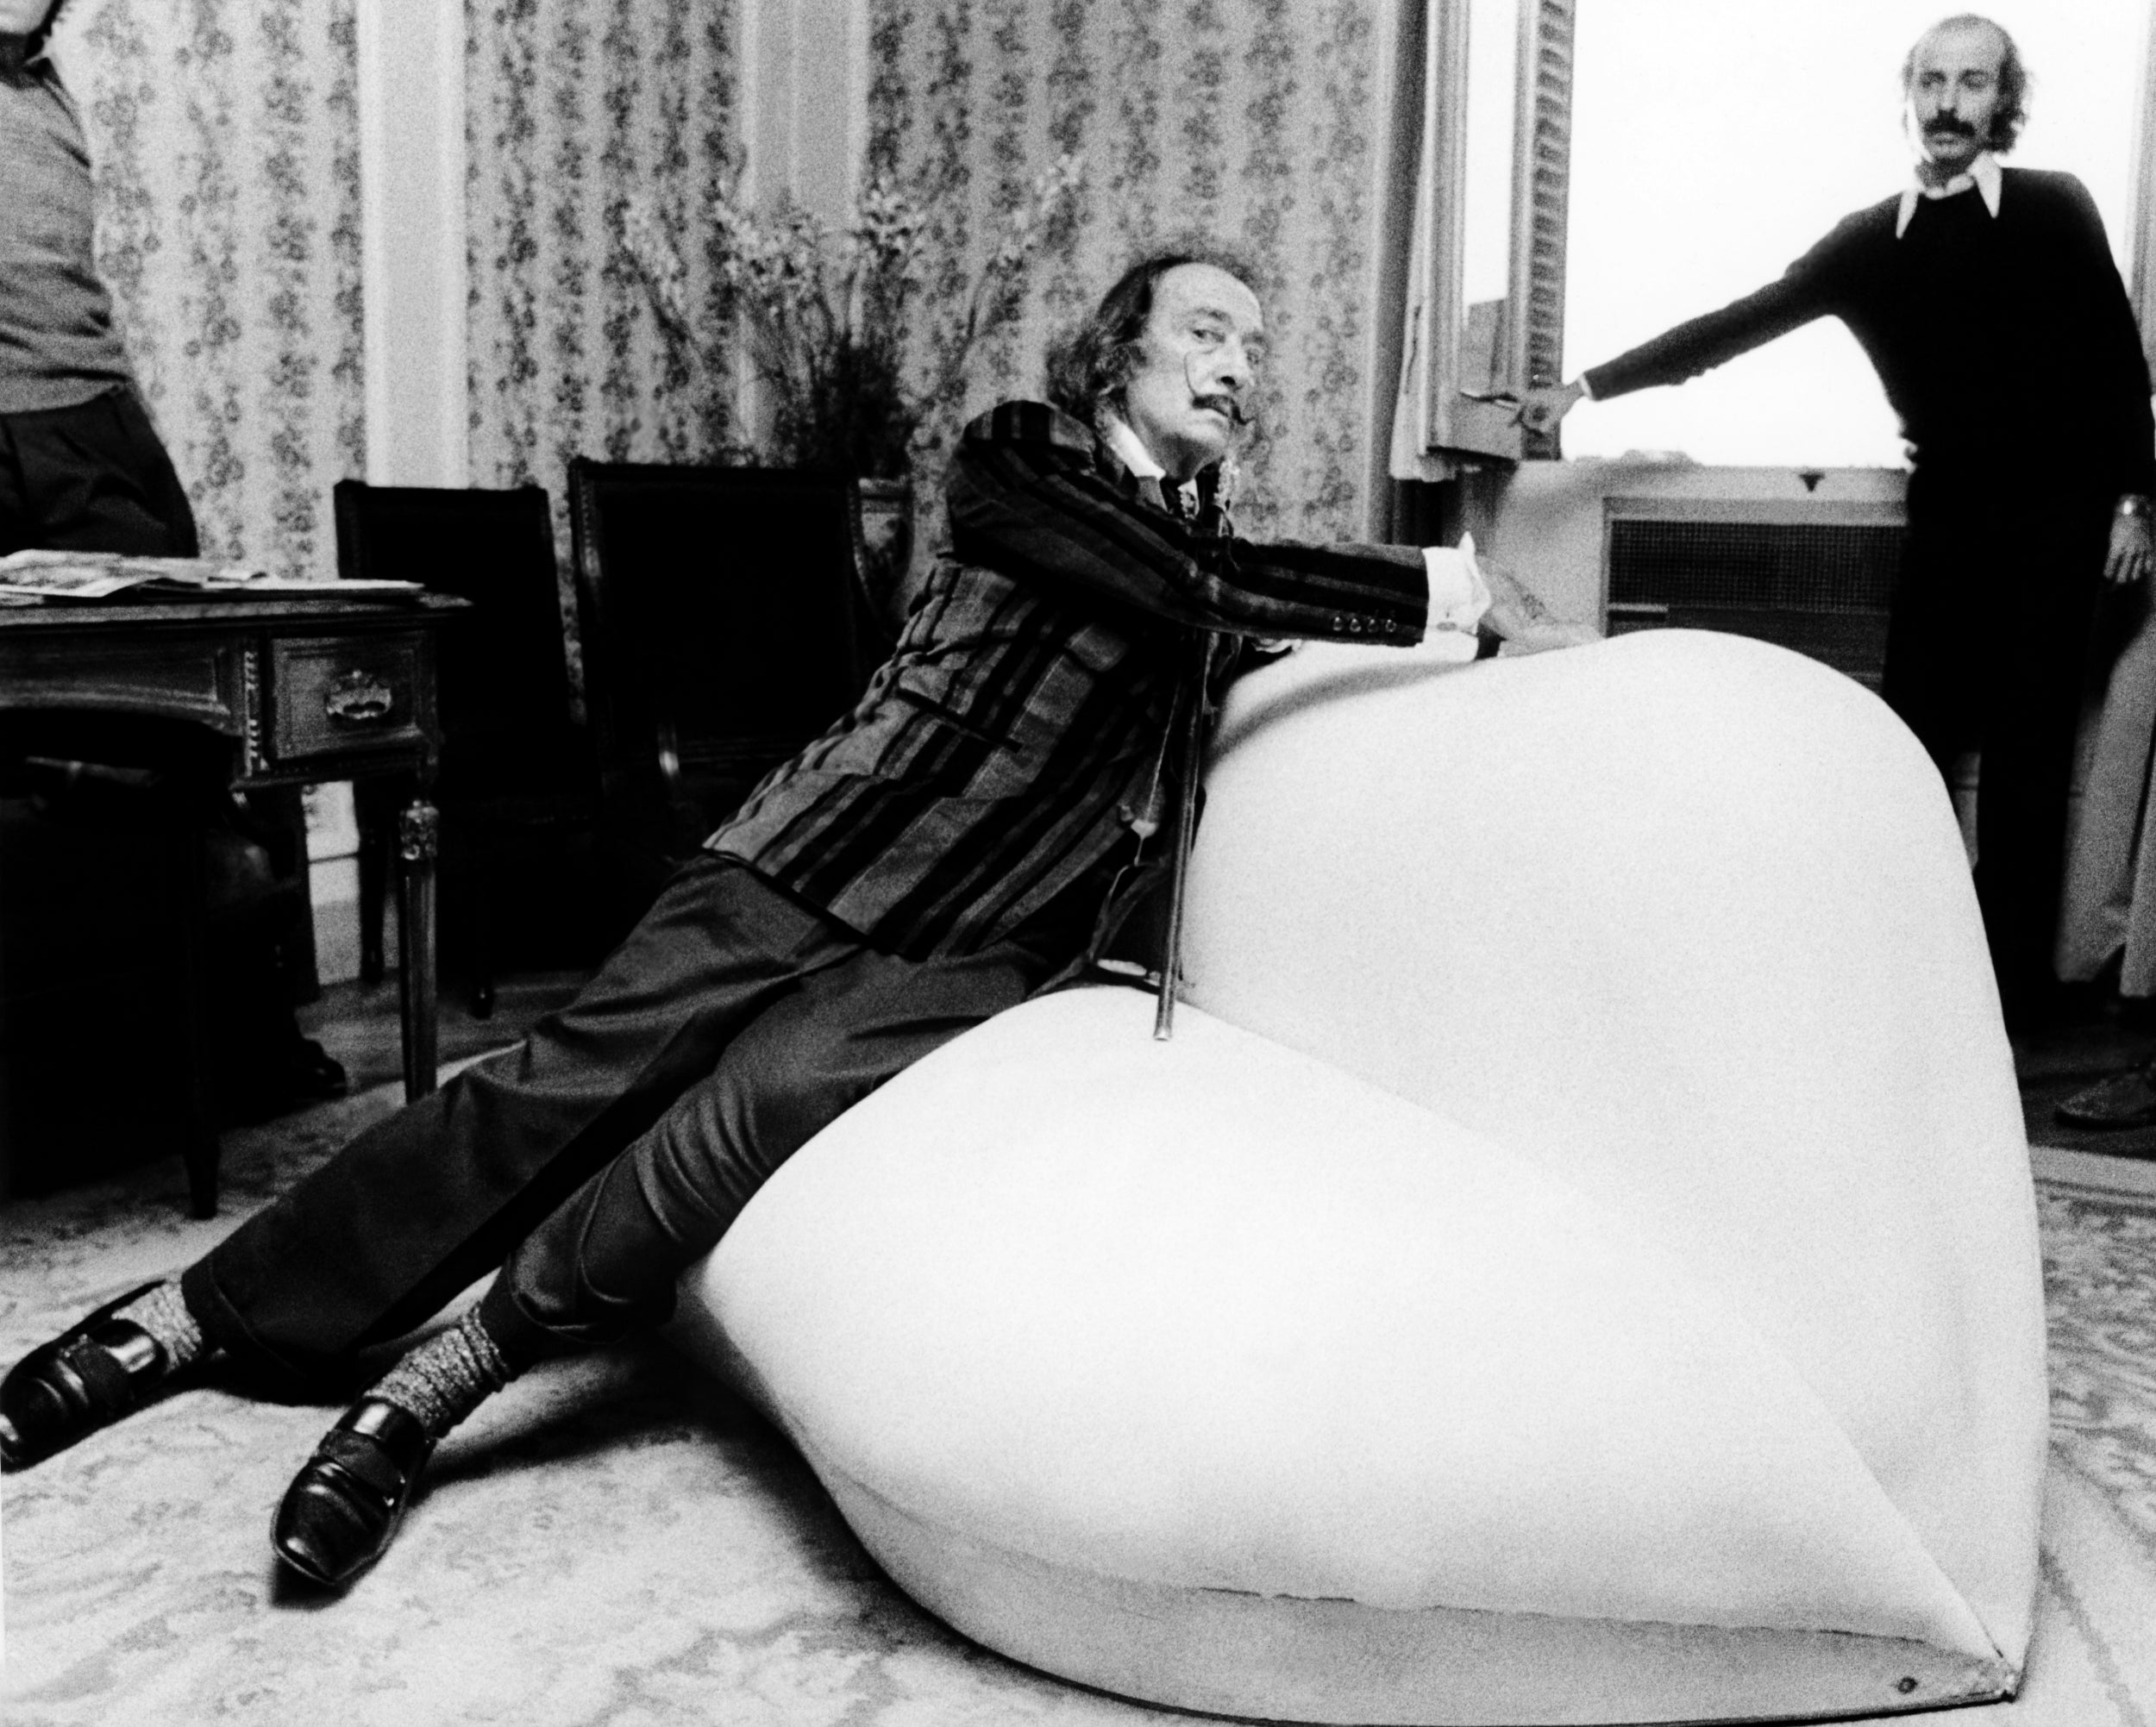 Dali on his famous red-satin sofa which he called ‘Mae West Lips’